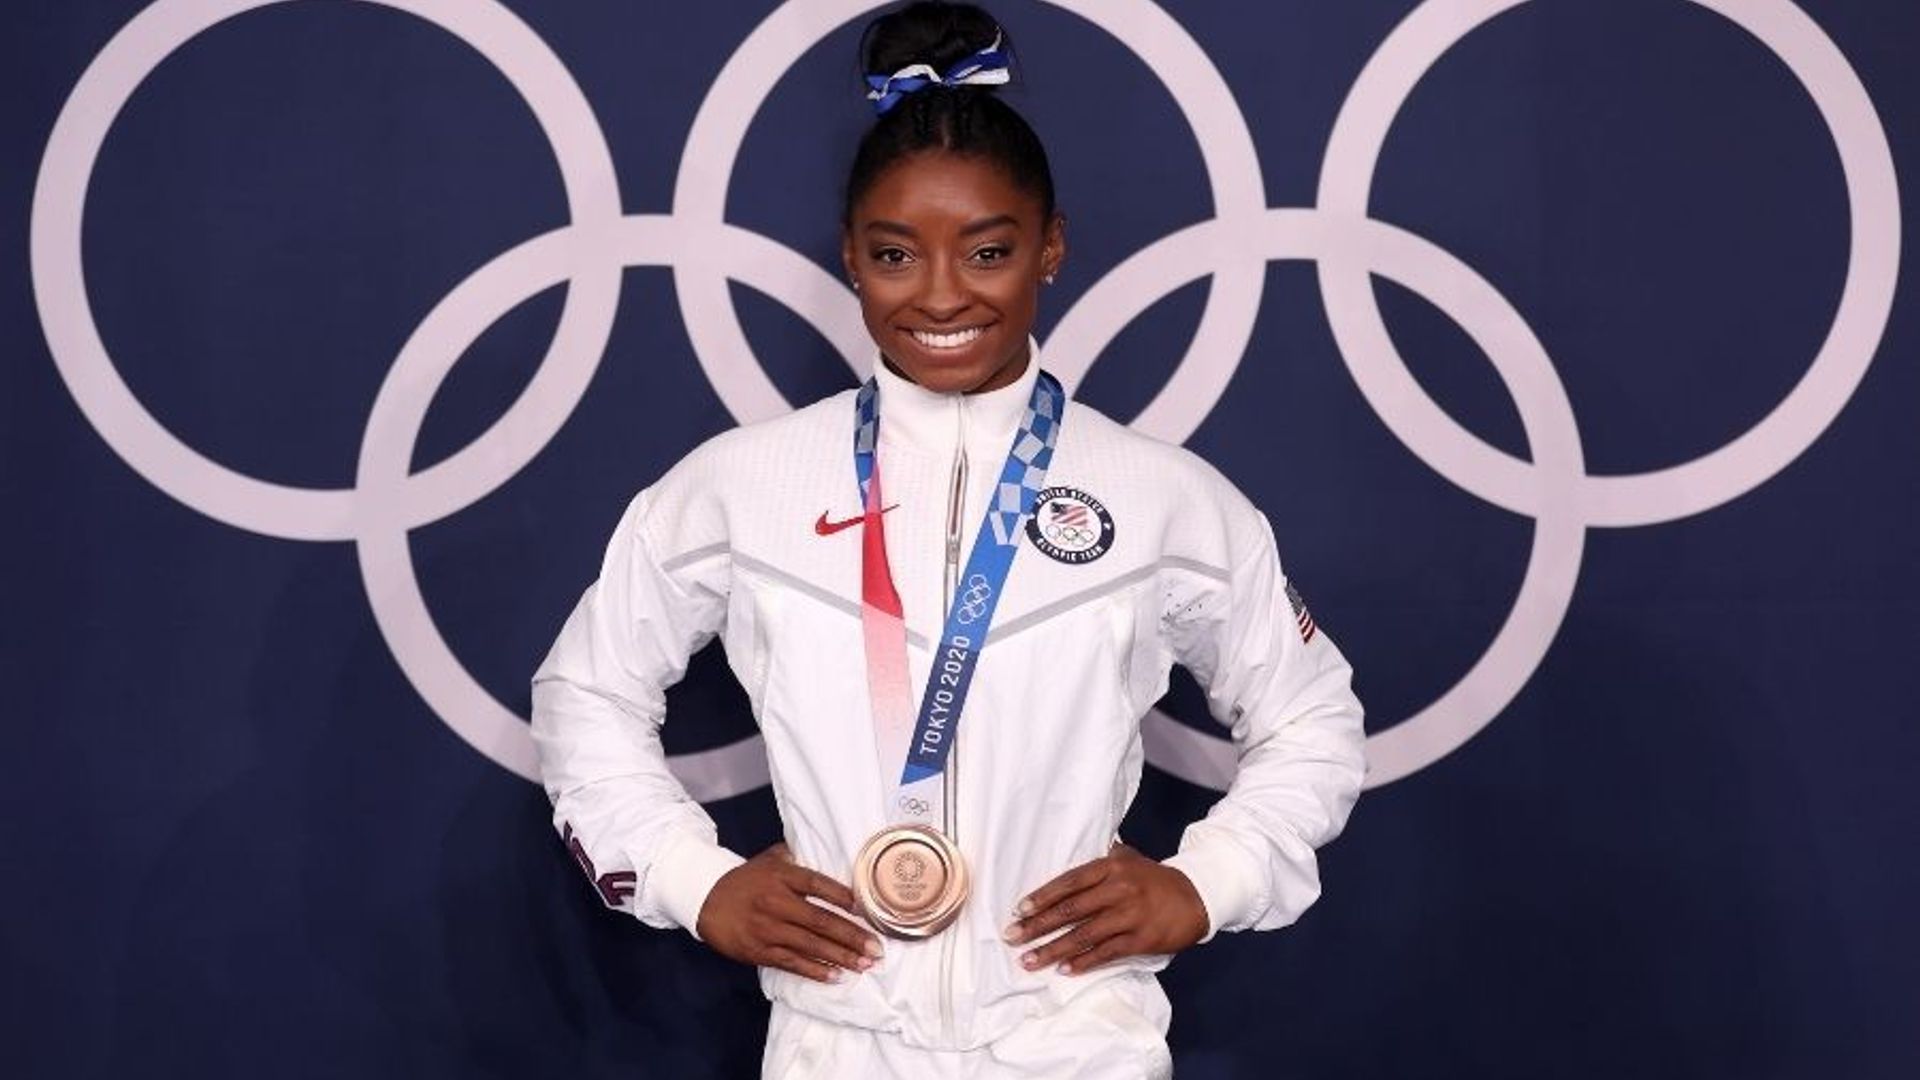 Simone Biles speaks out about mental health after winning bronze in balance beam at Tokyo Olympics